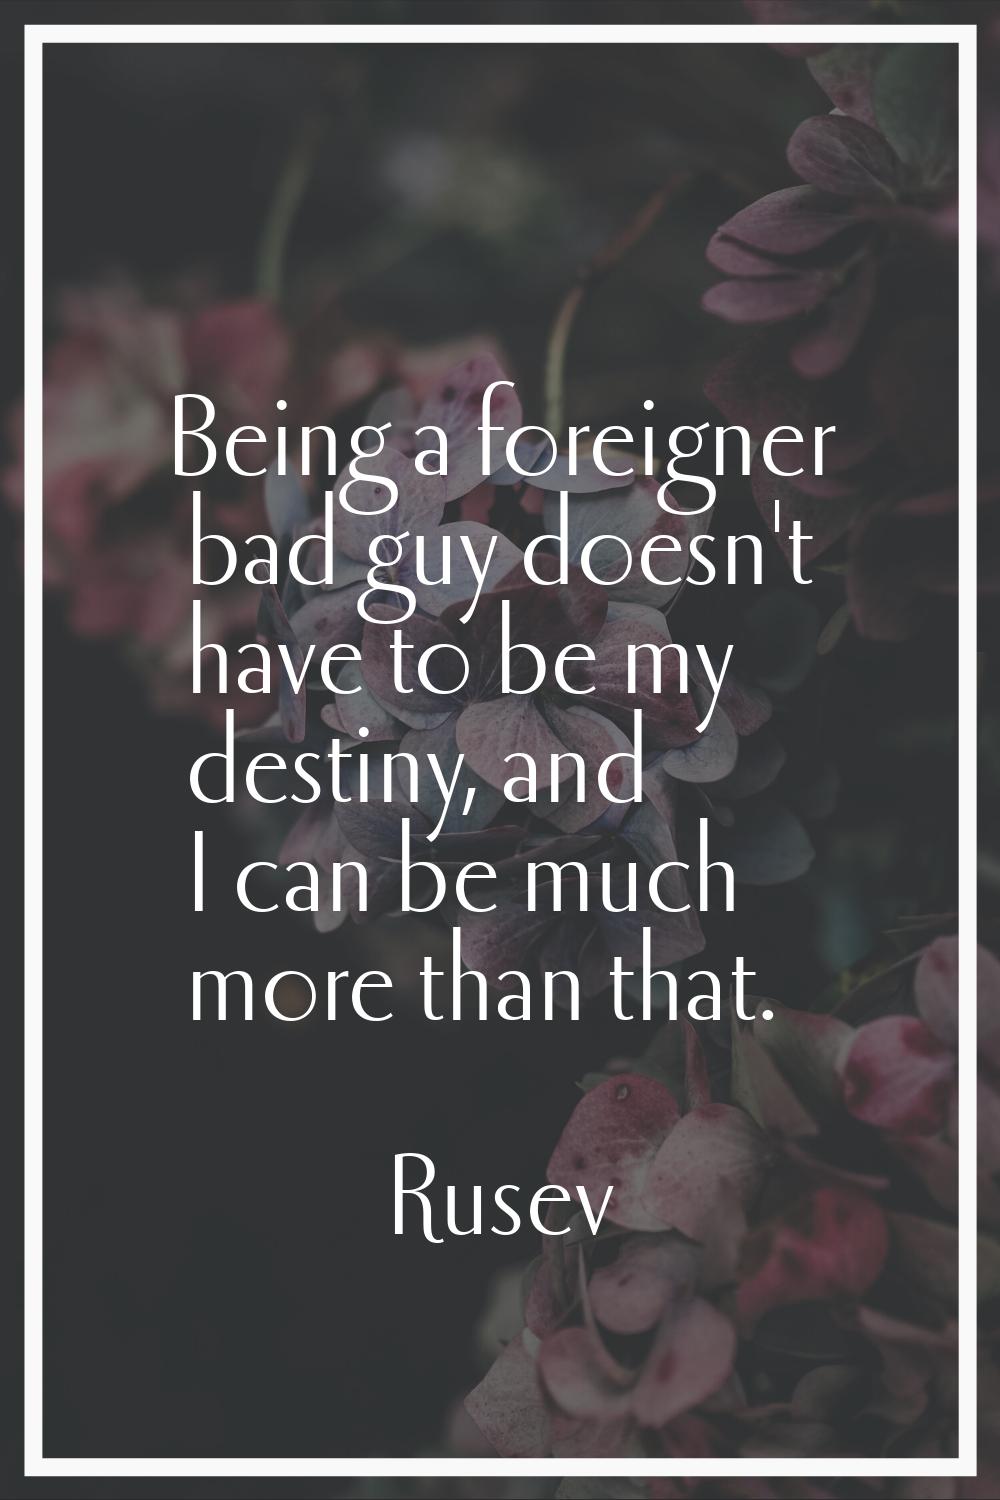 Being a foreigner bad guy doesn't have to be my destiny, and I can be much more than that.